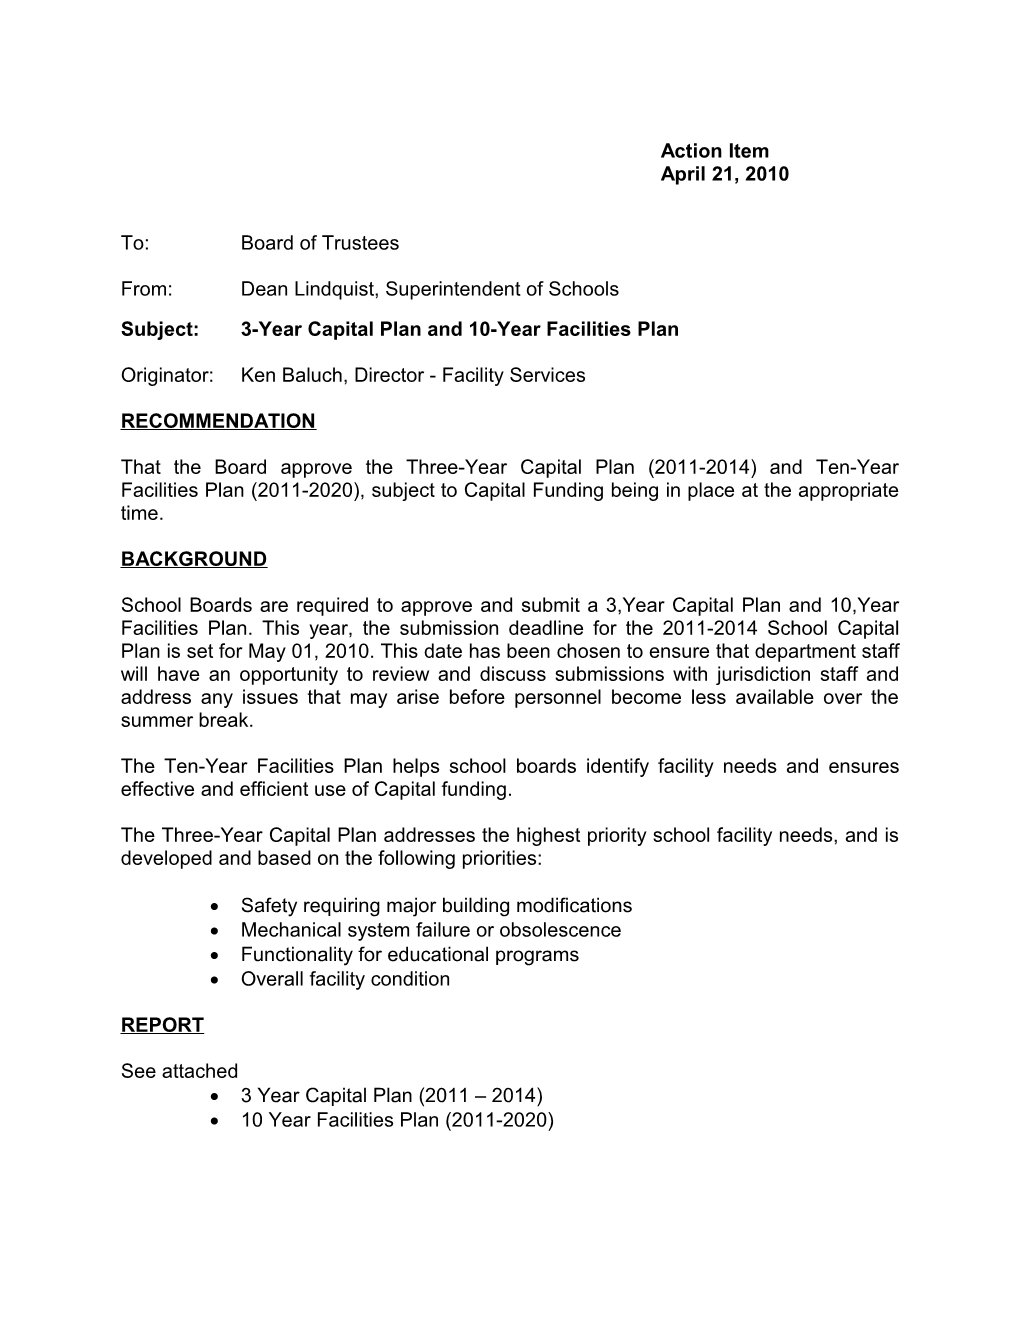 Subject:3-Year Capital Plan and 10-Year Facilities Plan